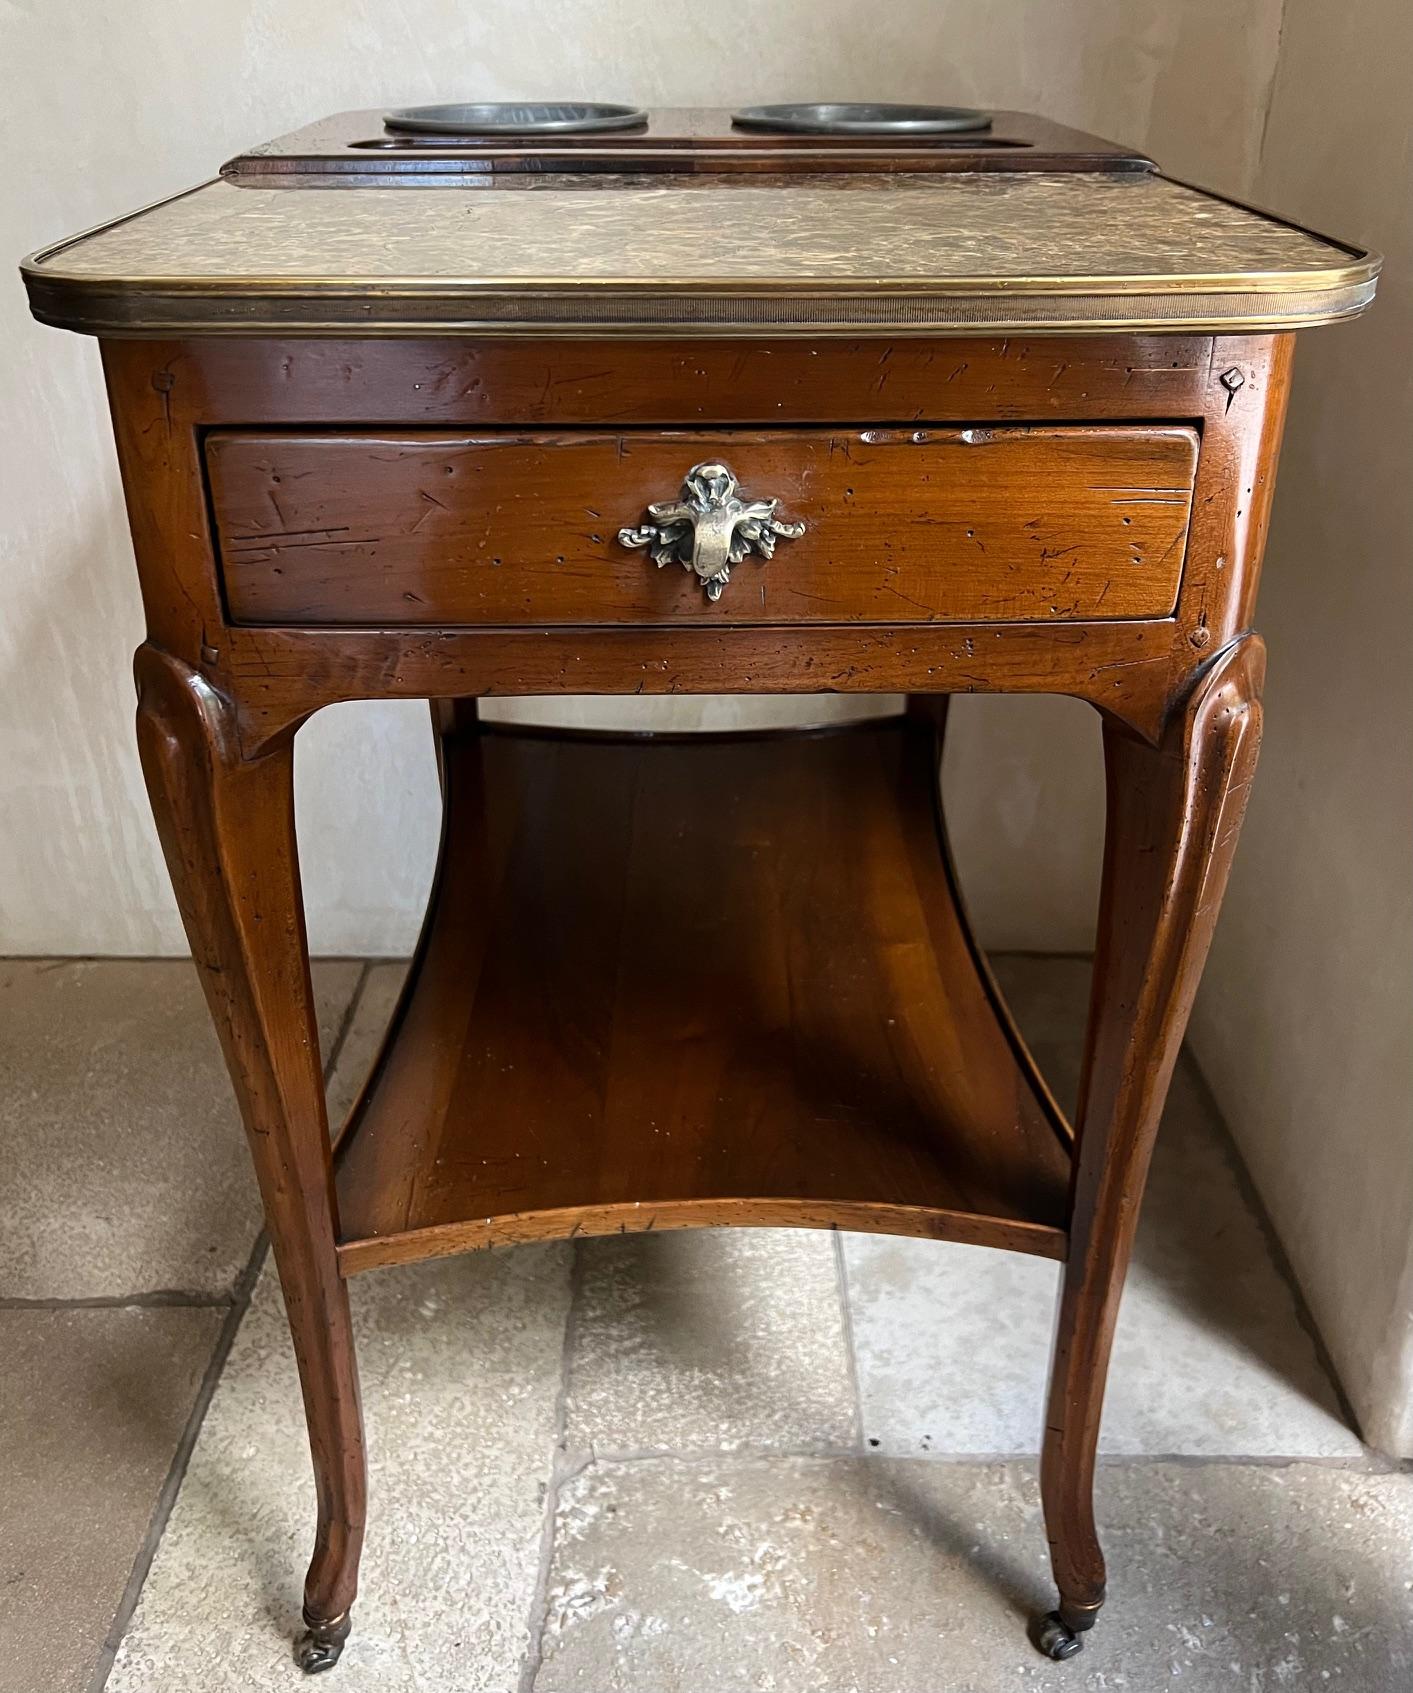 Antique rafraichissoir / champagne table made in France in the 1930's. The design, attributed to André Mailfert after a model by Joseph Canabas, is half marble trimmed in brass and half walnut with buckets inset. There is a lined drawer with a brass